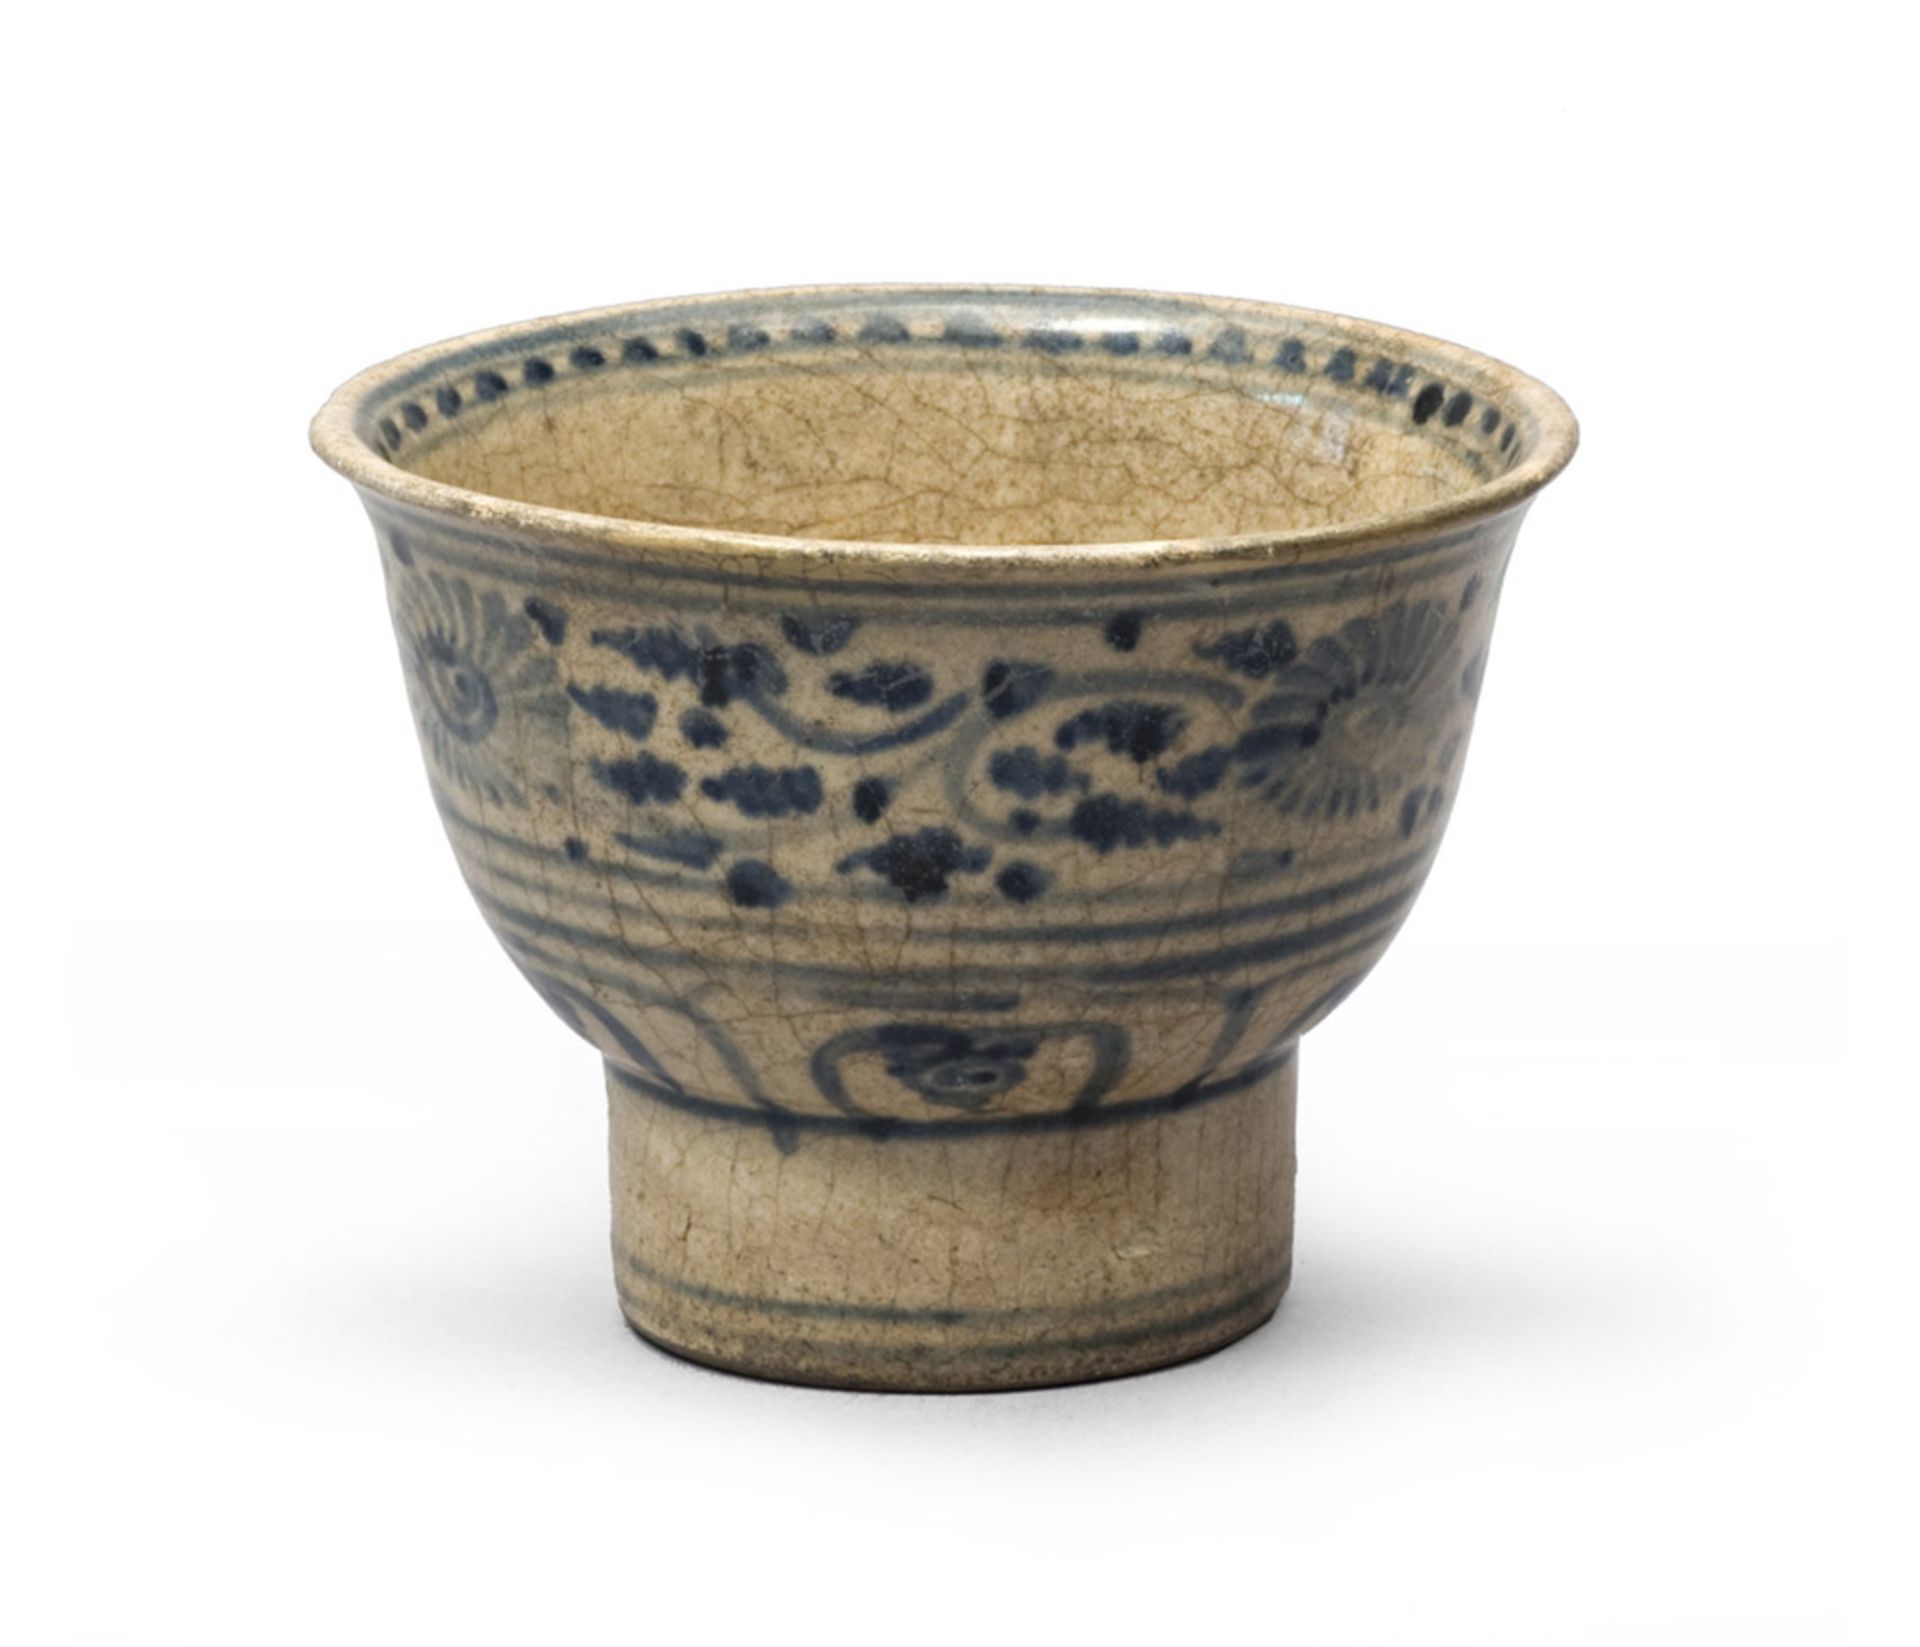 A VIETNAMESE ENAMELLED AND GLAZED CERAMIC BOWL, 16TH - 17TH CENTURY